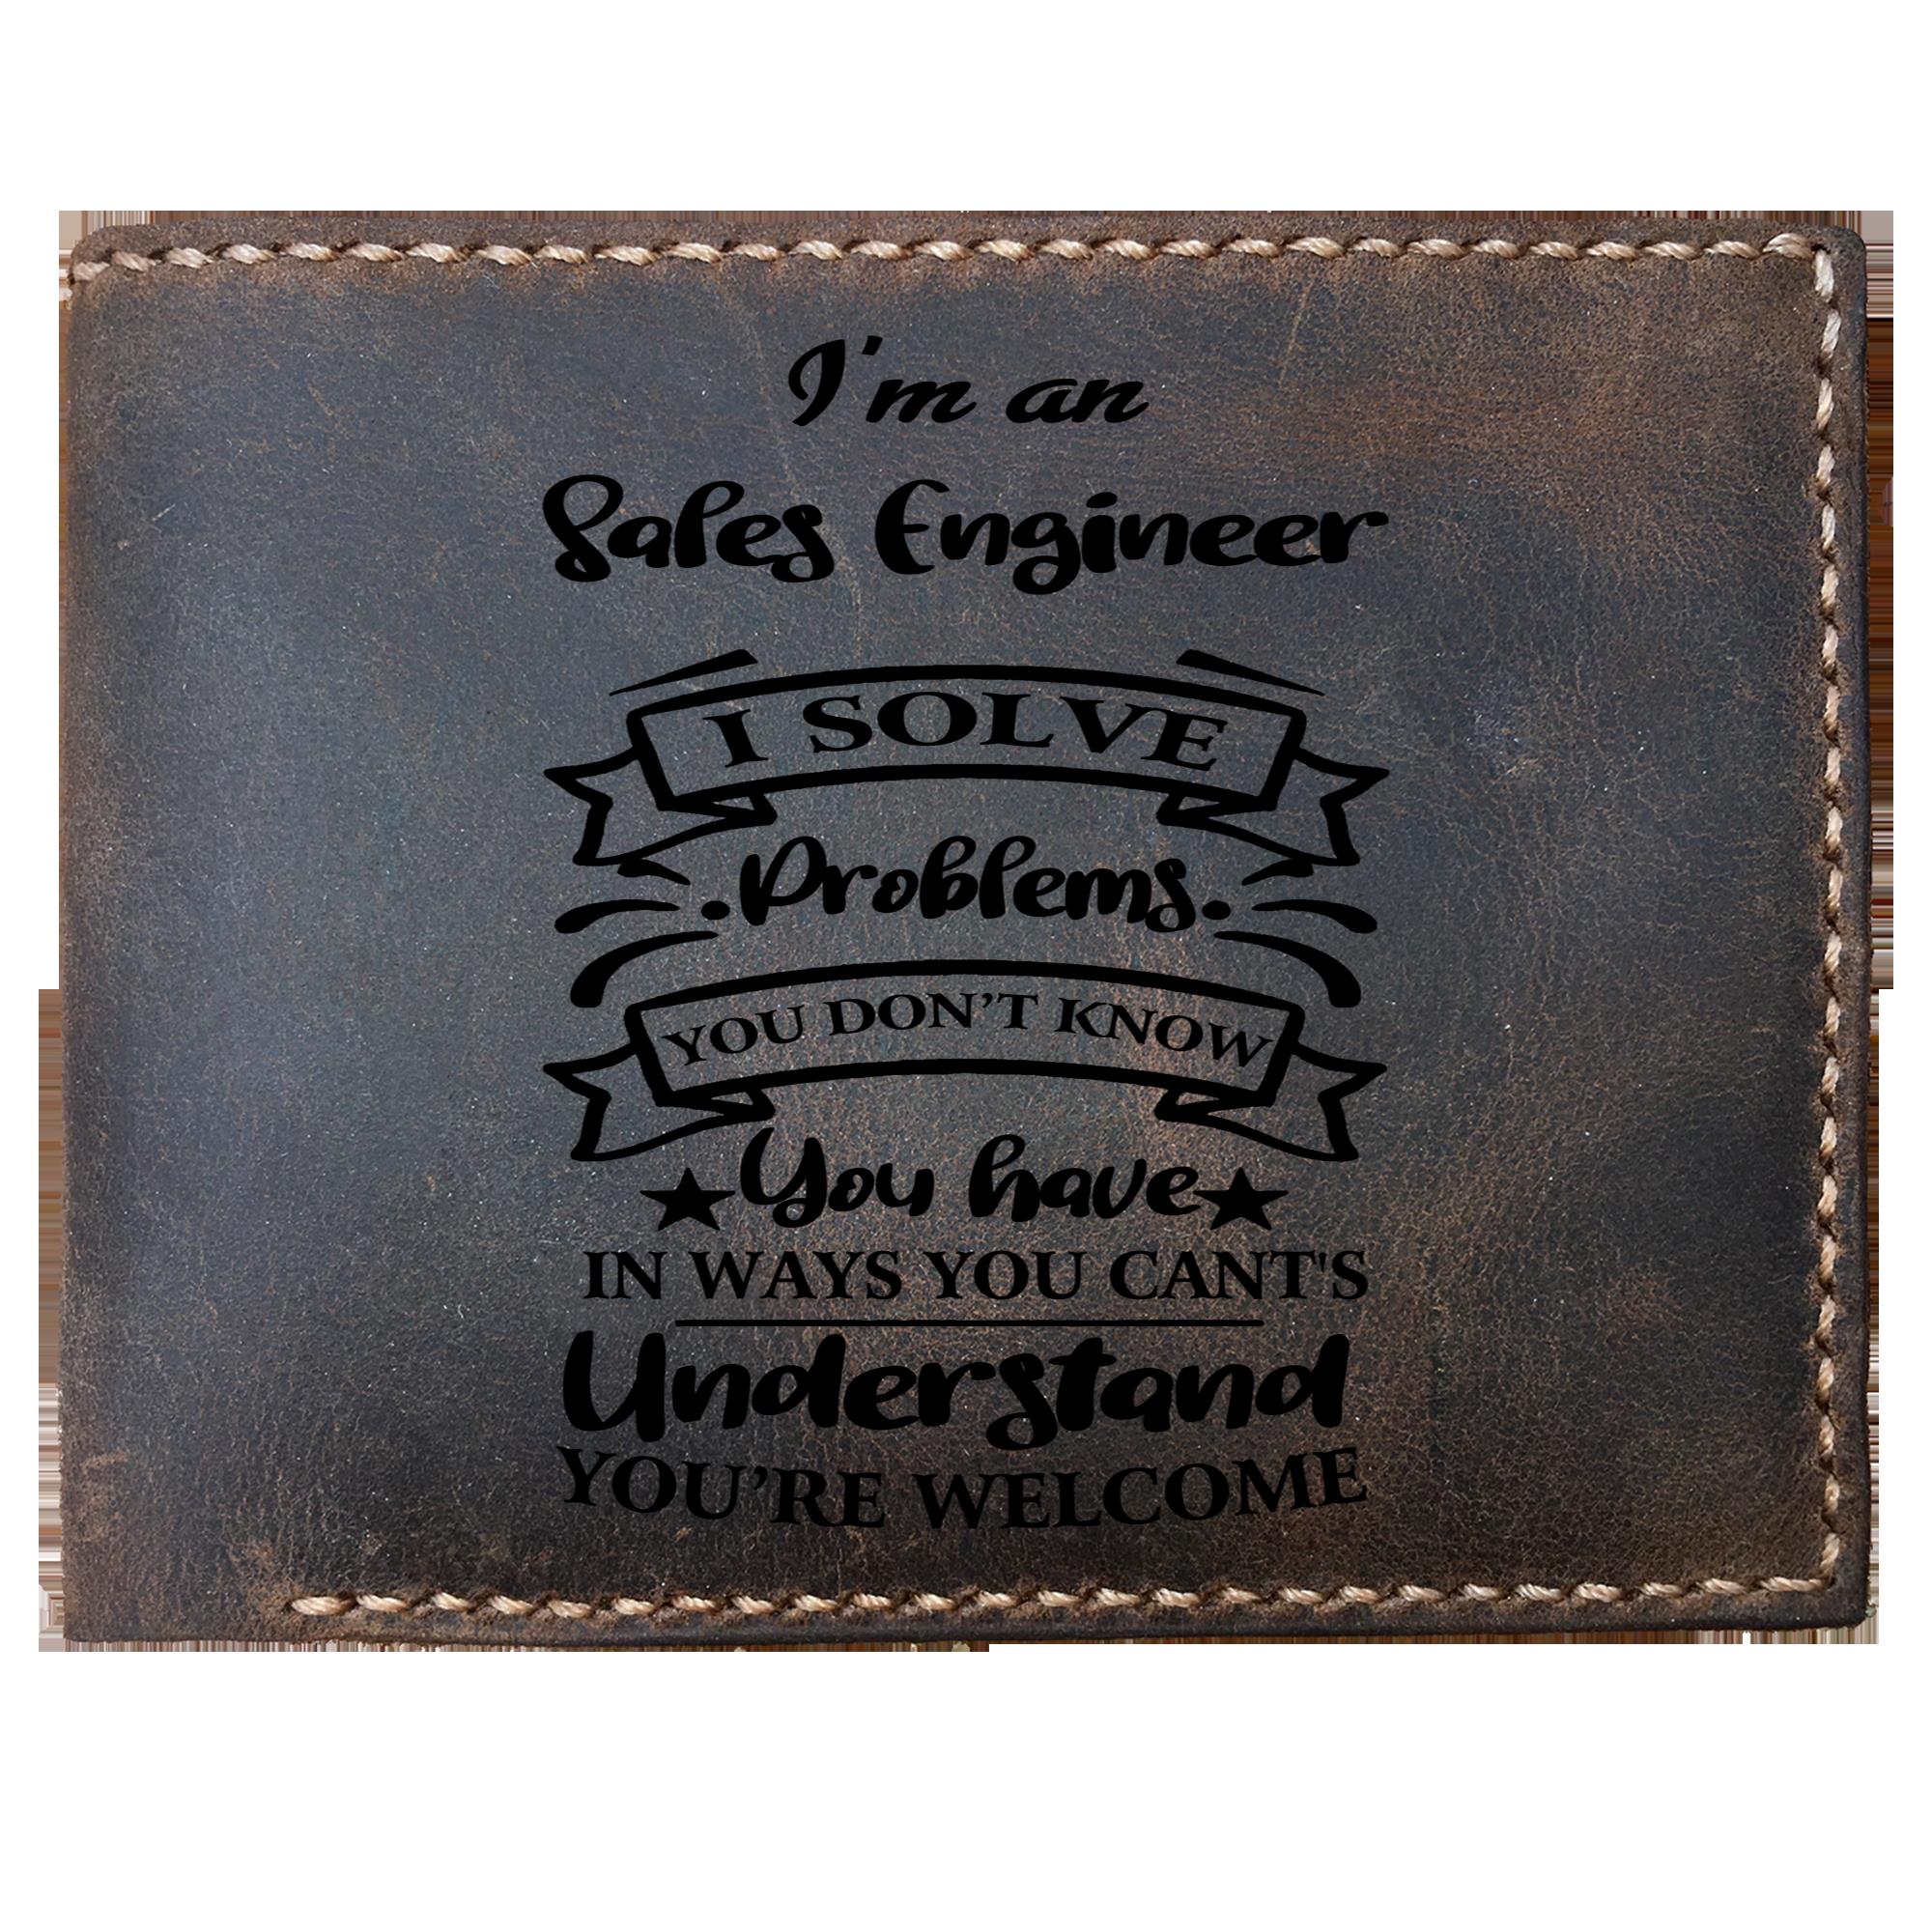 Skitongifts Funny Custom Laser Engraved Bifold Leather Wallet For Men, I'm an Sales Engineer Solve Problems, Father's Day Gifts